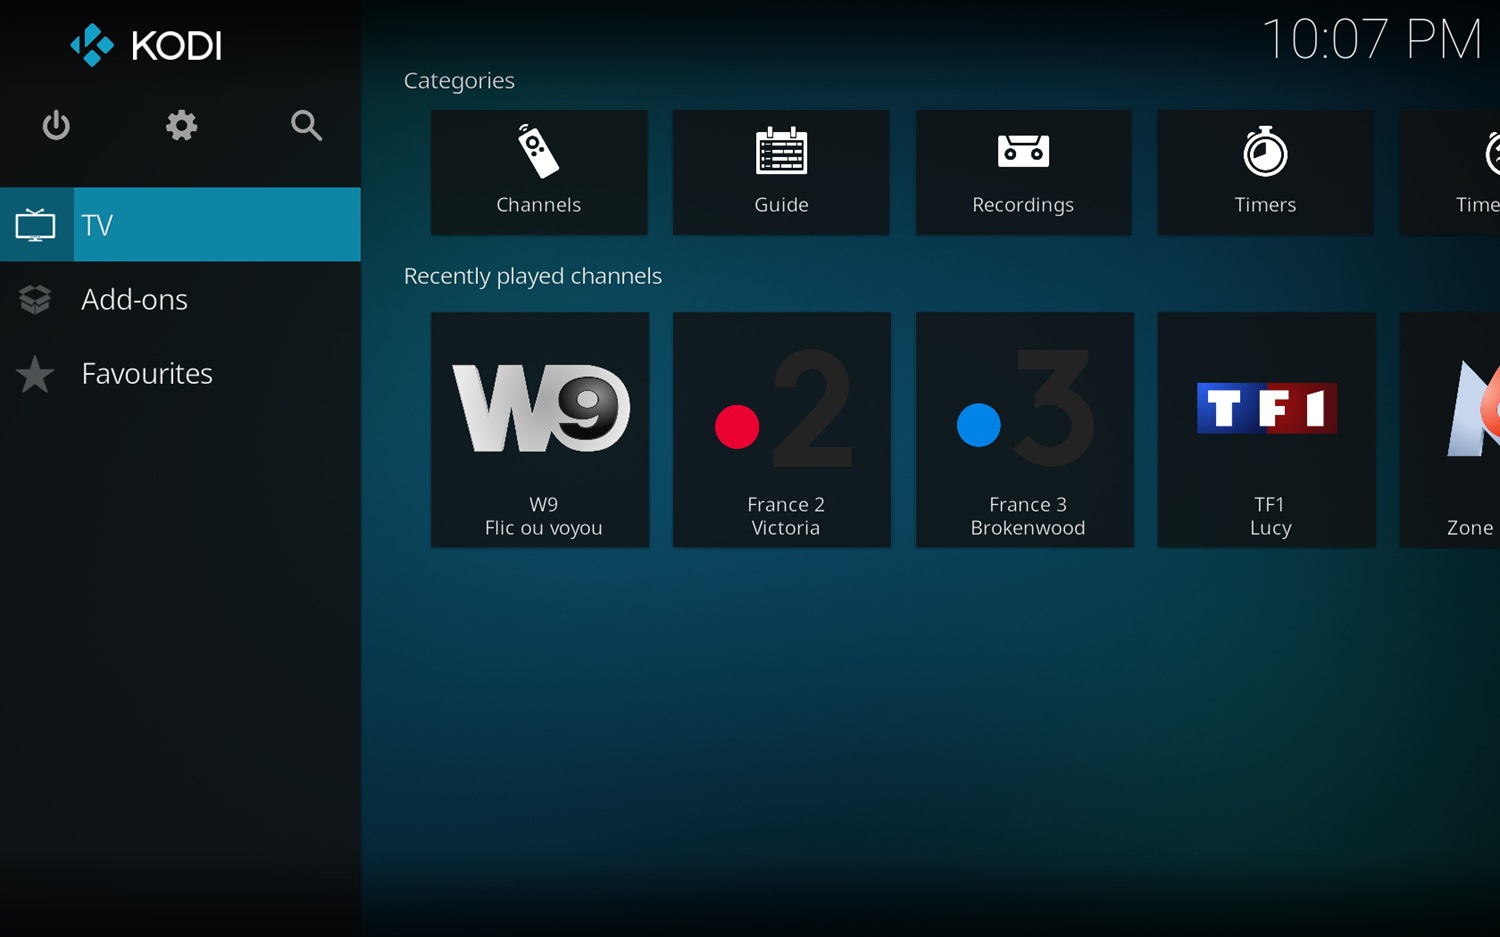 live tv section within kodi